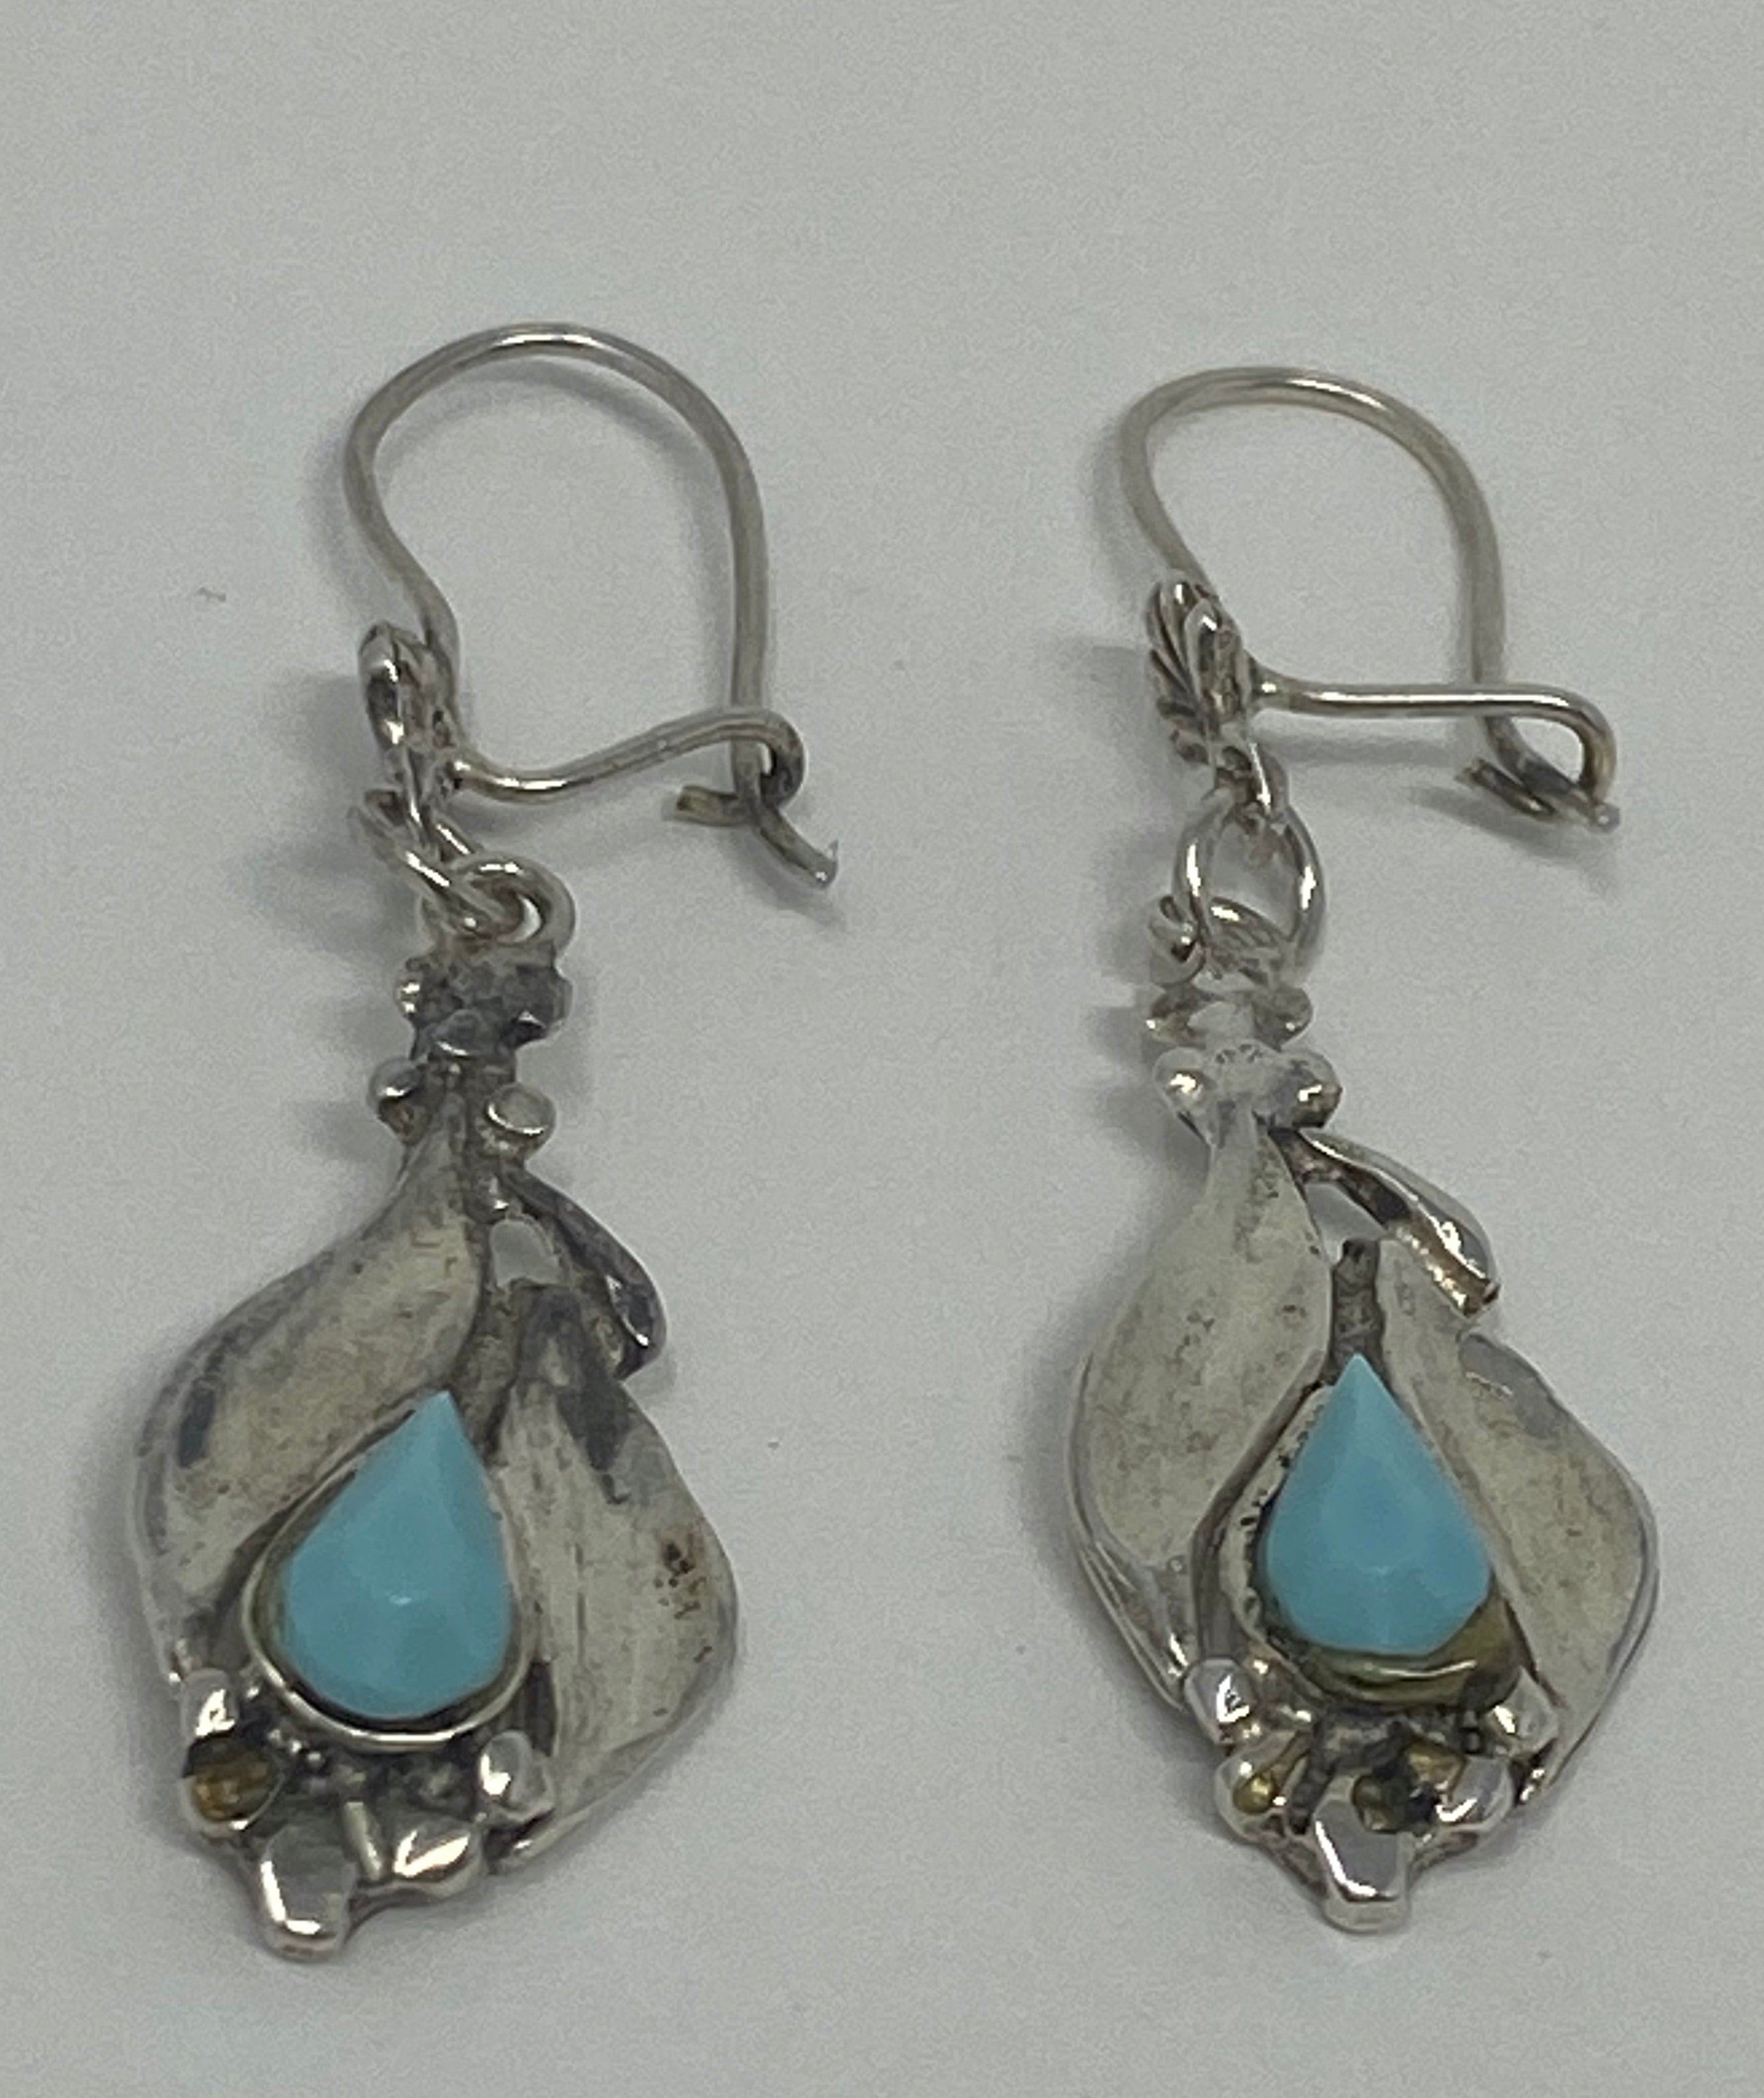 Vintage Silver and Turquoise Earrings